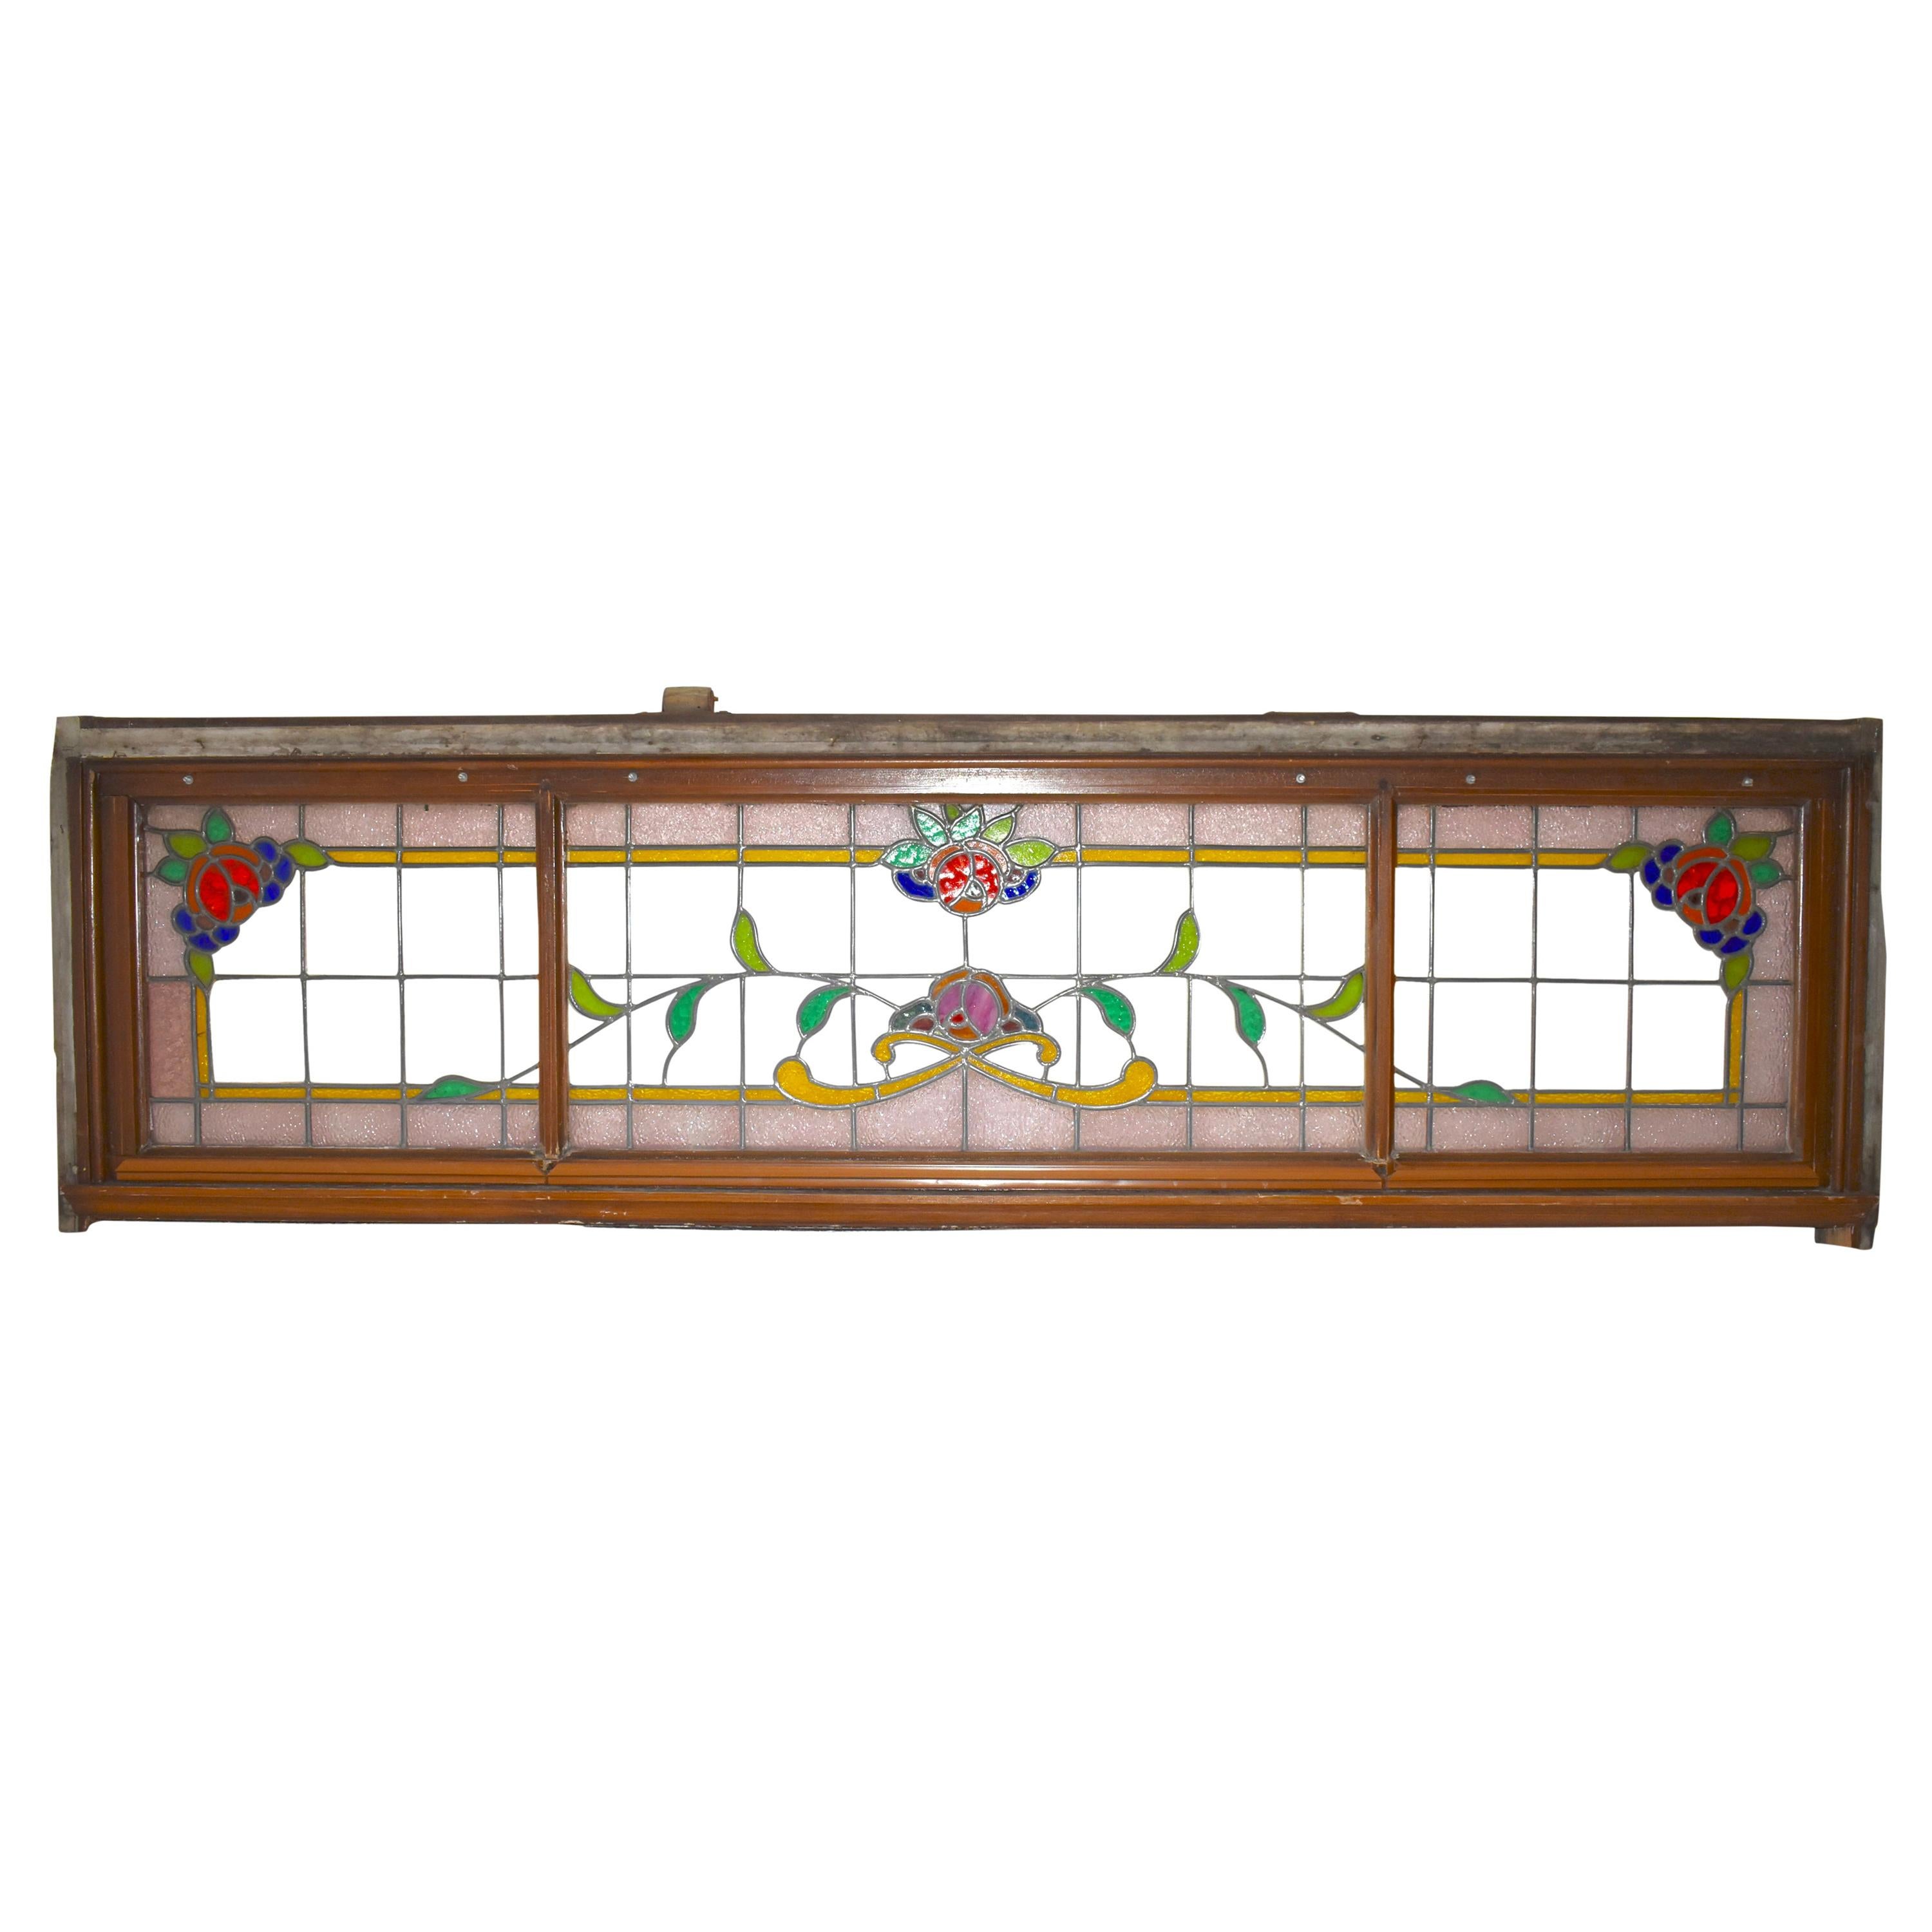 Leaded Stained Glass Window, circa 1880